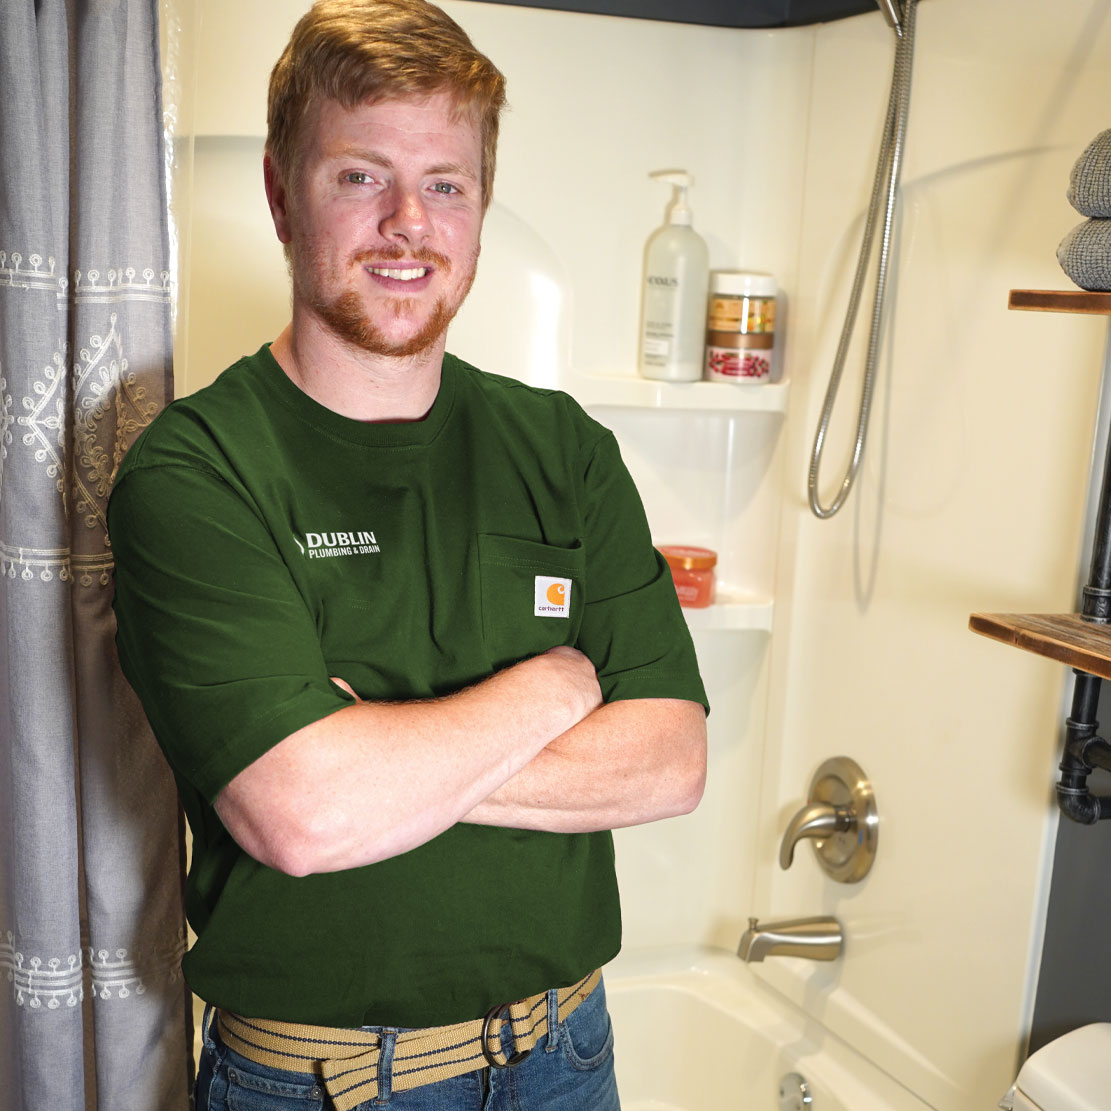 Plumber in front of a bathtub and show